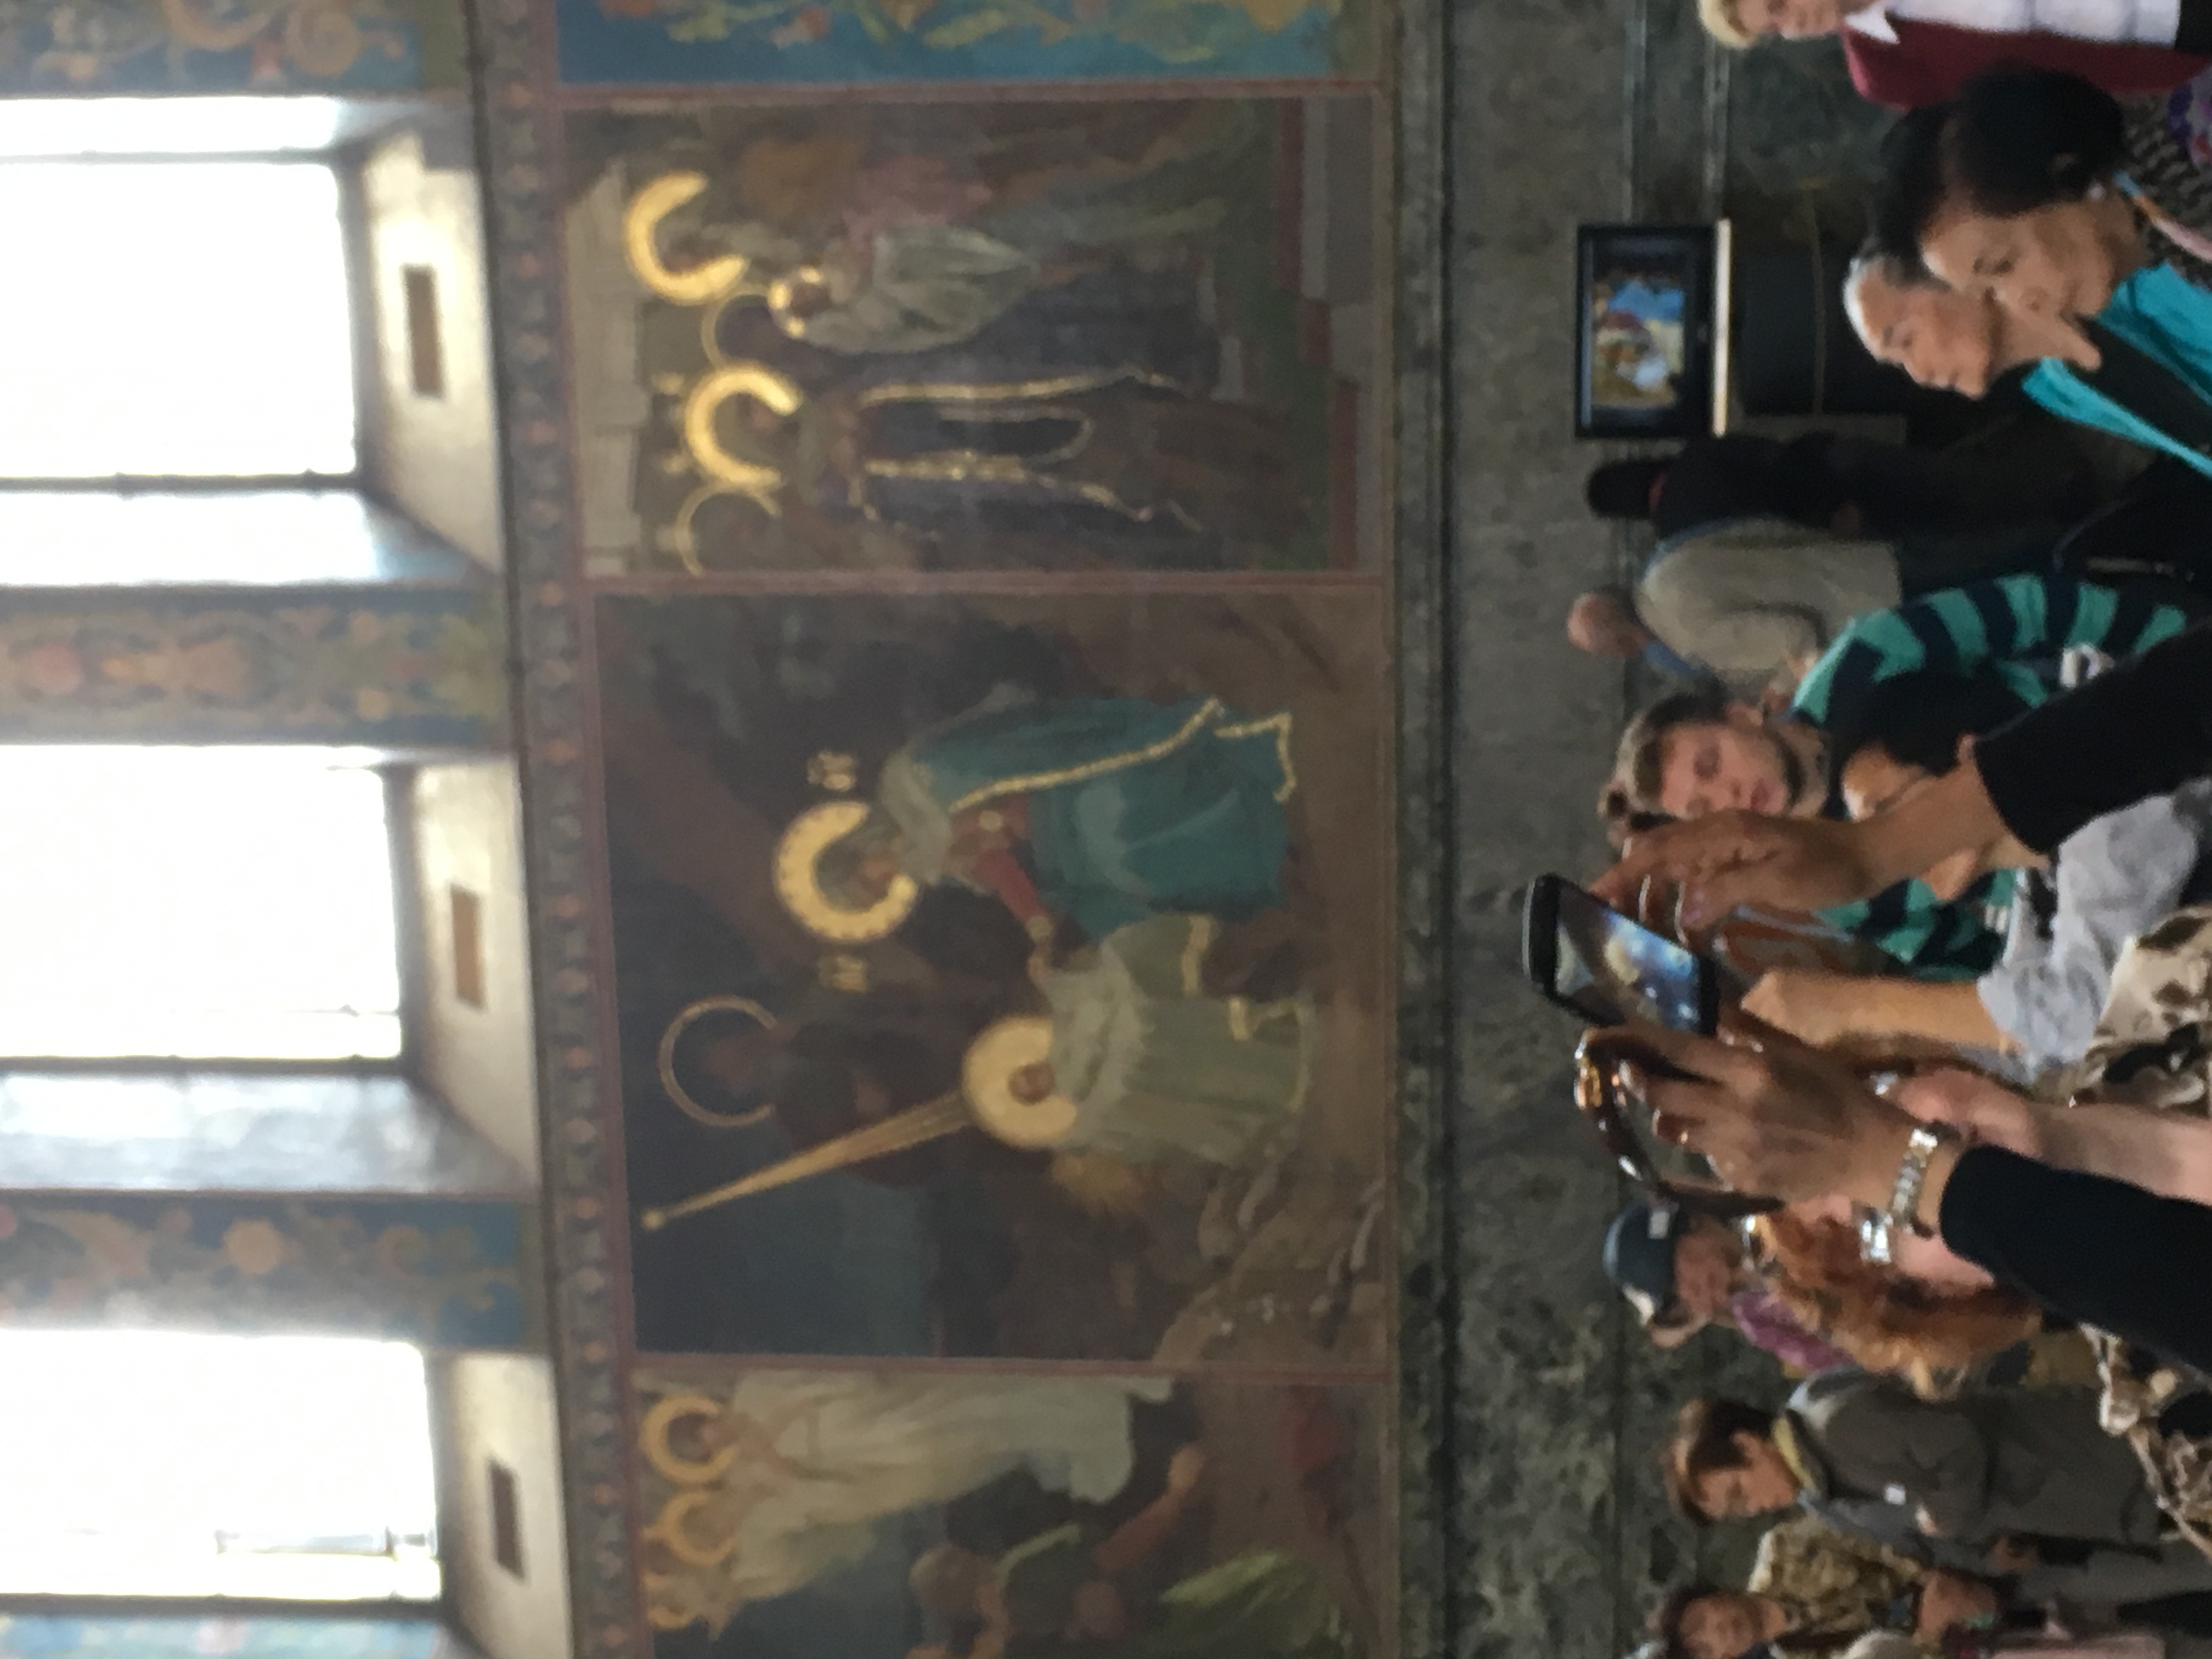 People taking photos inside a decorated church